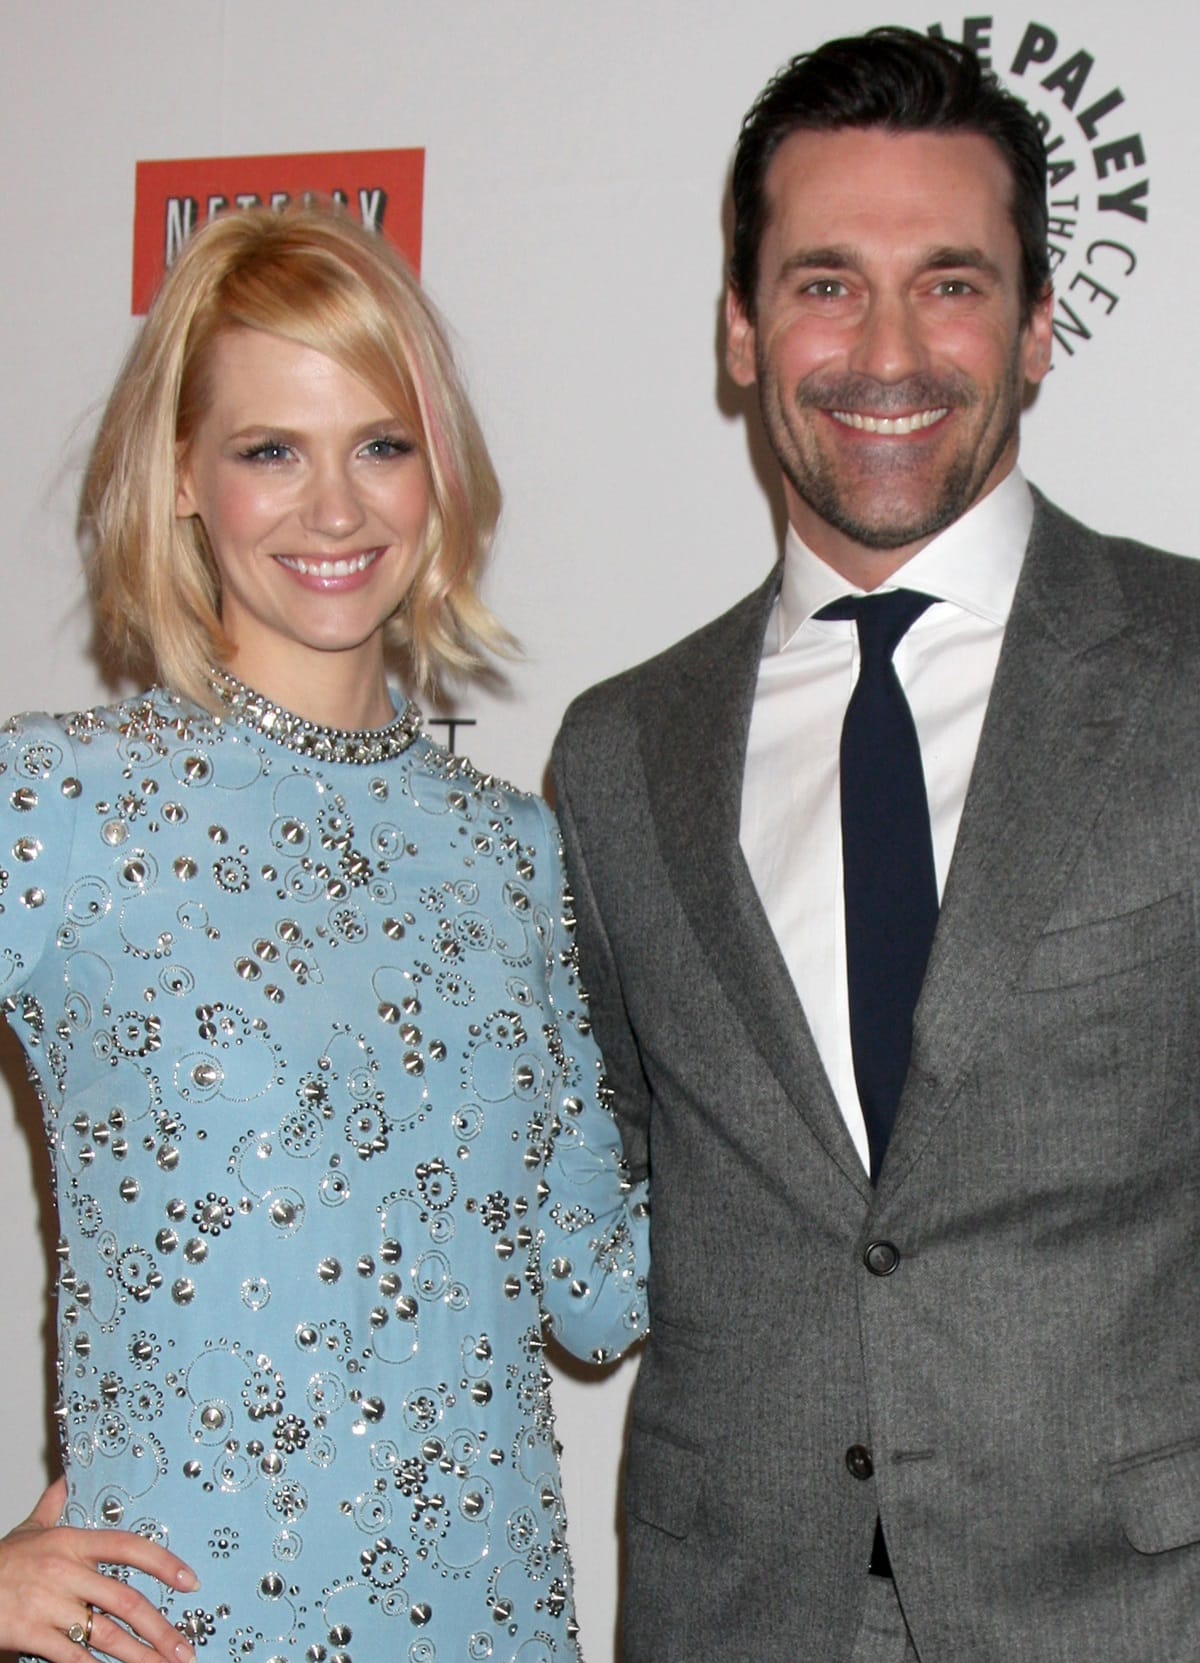 With a height of 5ft 6 (167.6 cm), January Jones is noticeably shorter than Jon Hamm, who stands at 6ft ¾ in (184.8 cm), resulting in a significant height difference of approximately 6 inches